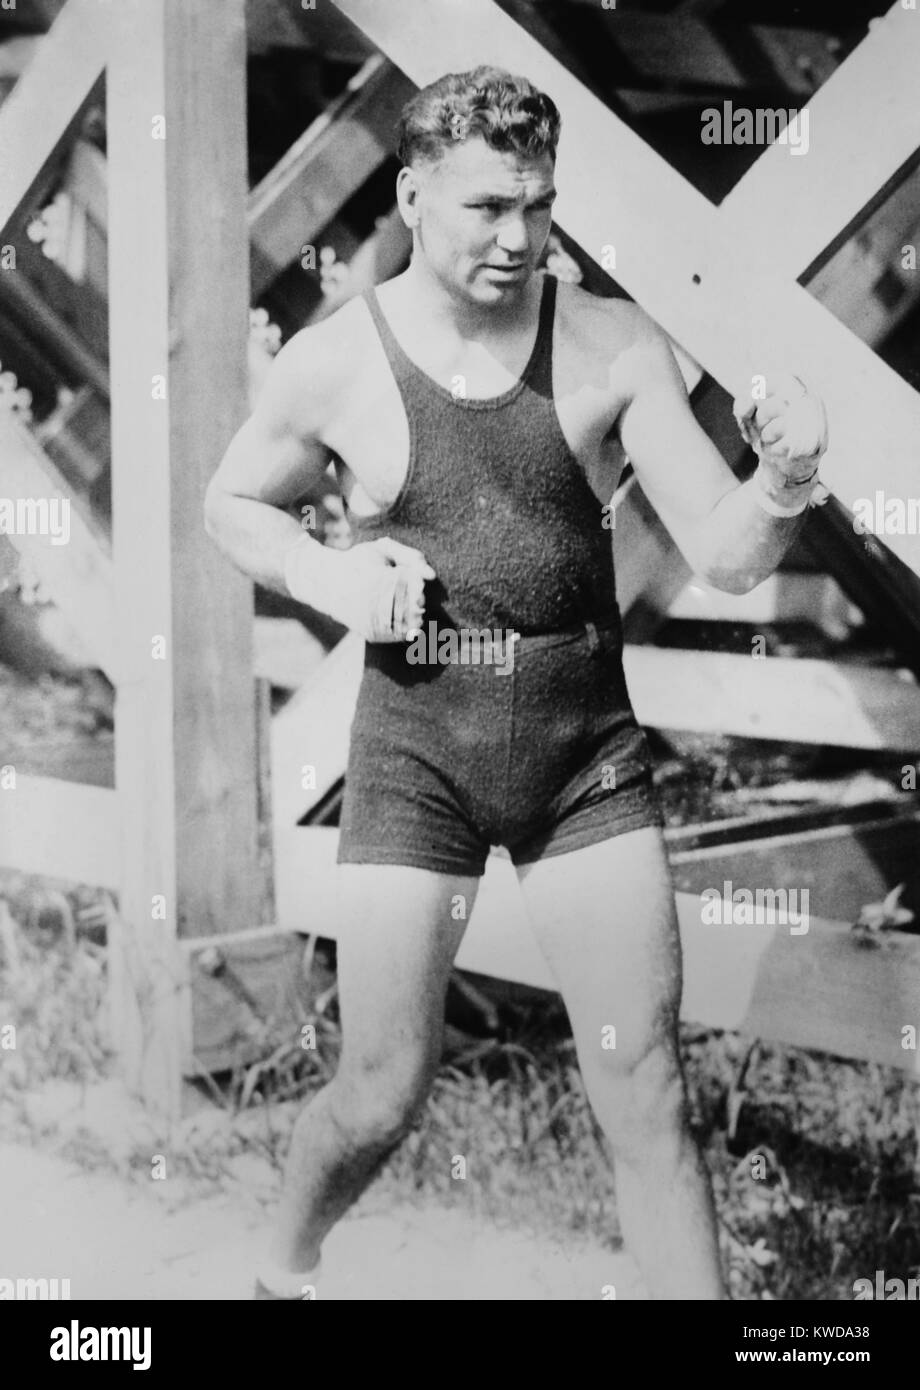 Jack Dempsey, the World Heavyweight Boxing Champion from 1919 to 1926. (BSLOC 2015 17 59) Stock Photo